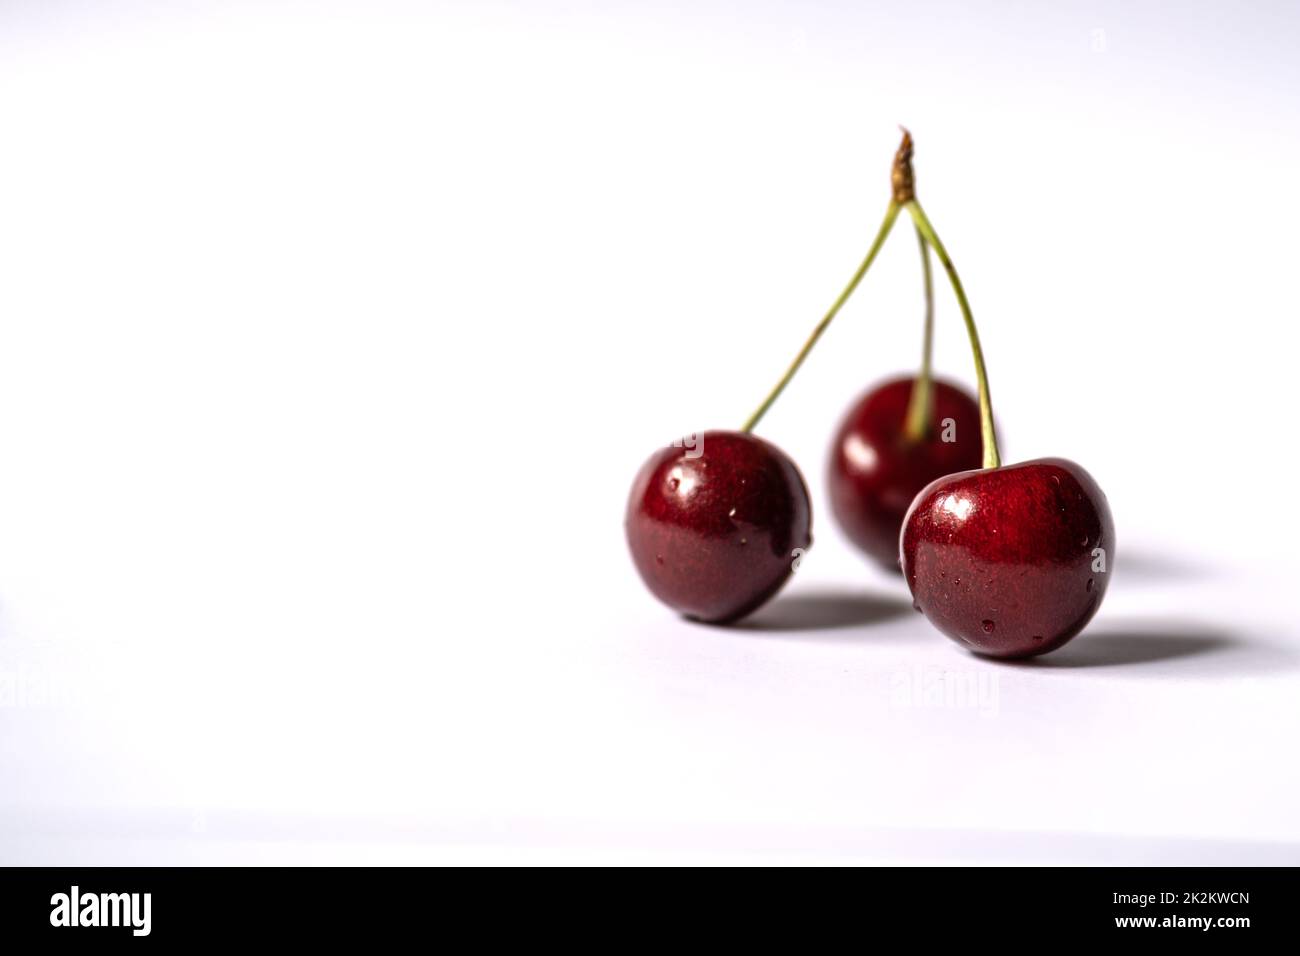 Three cherries are placed on a light background with negative space Stock Photo